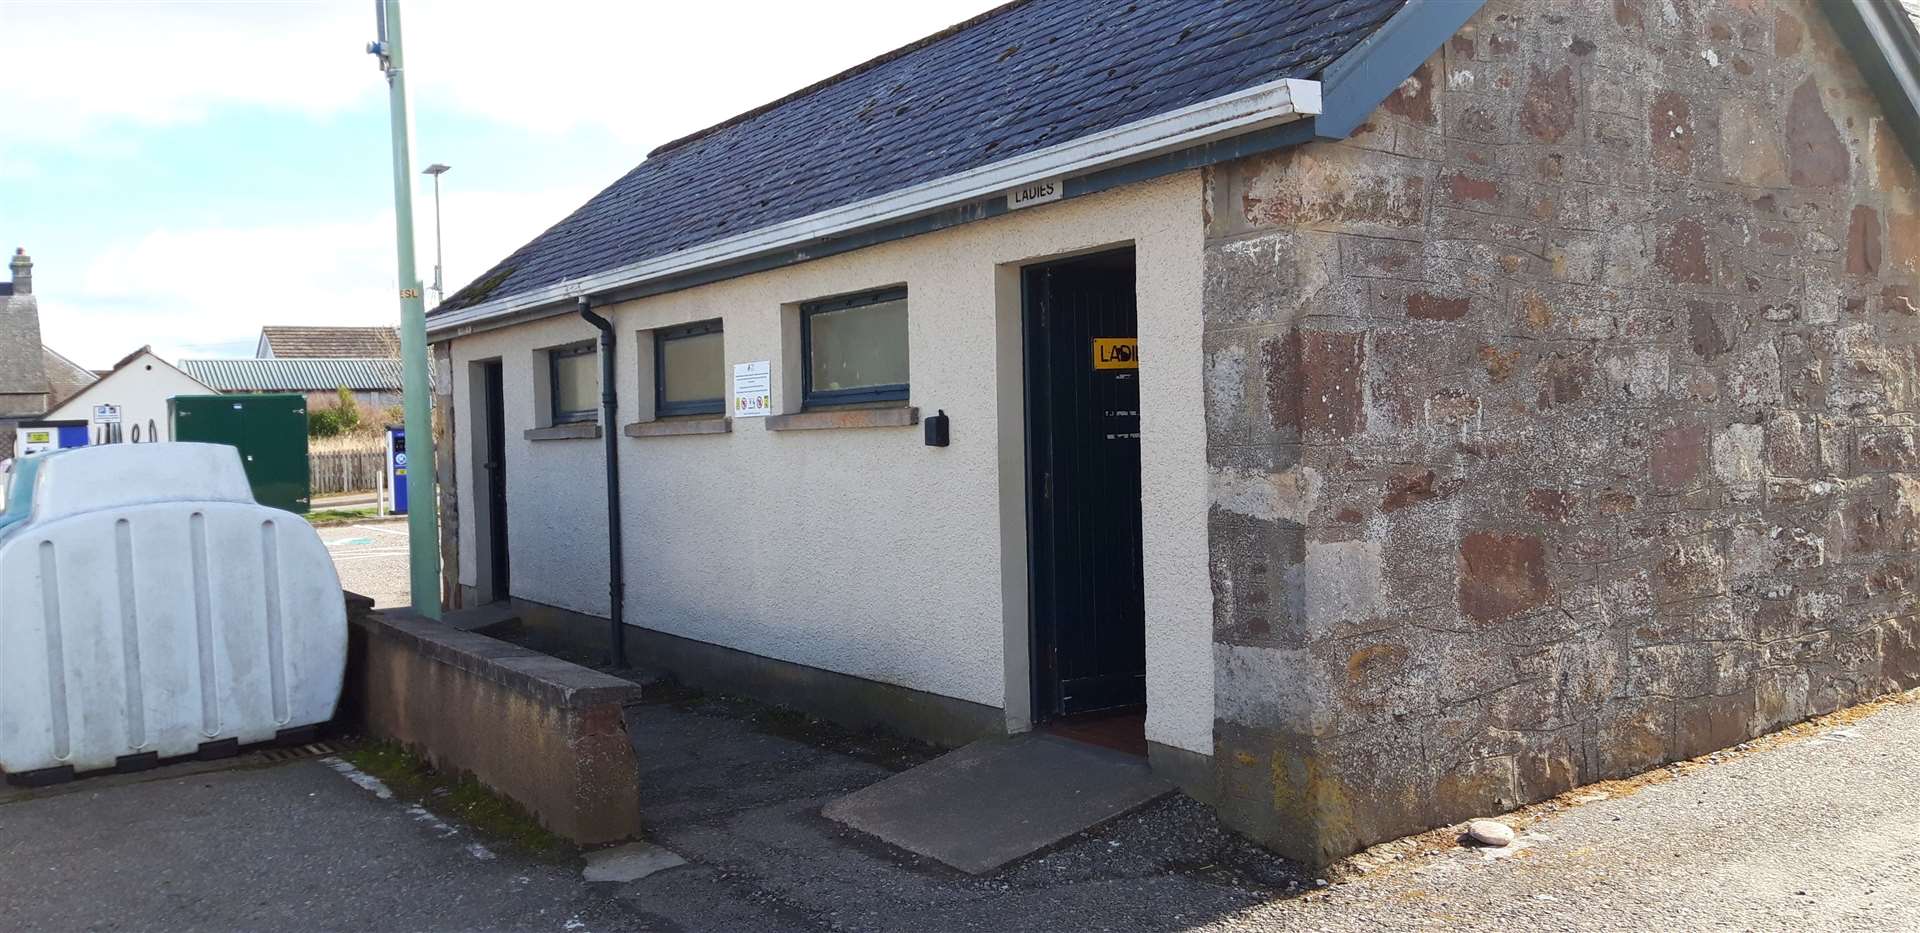 Brora public conveniences are well used but are not “pleasant” to visit.